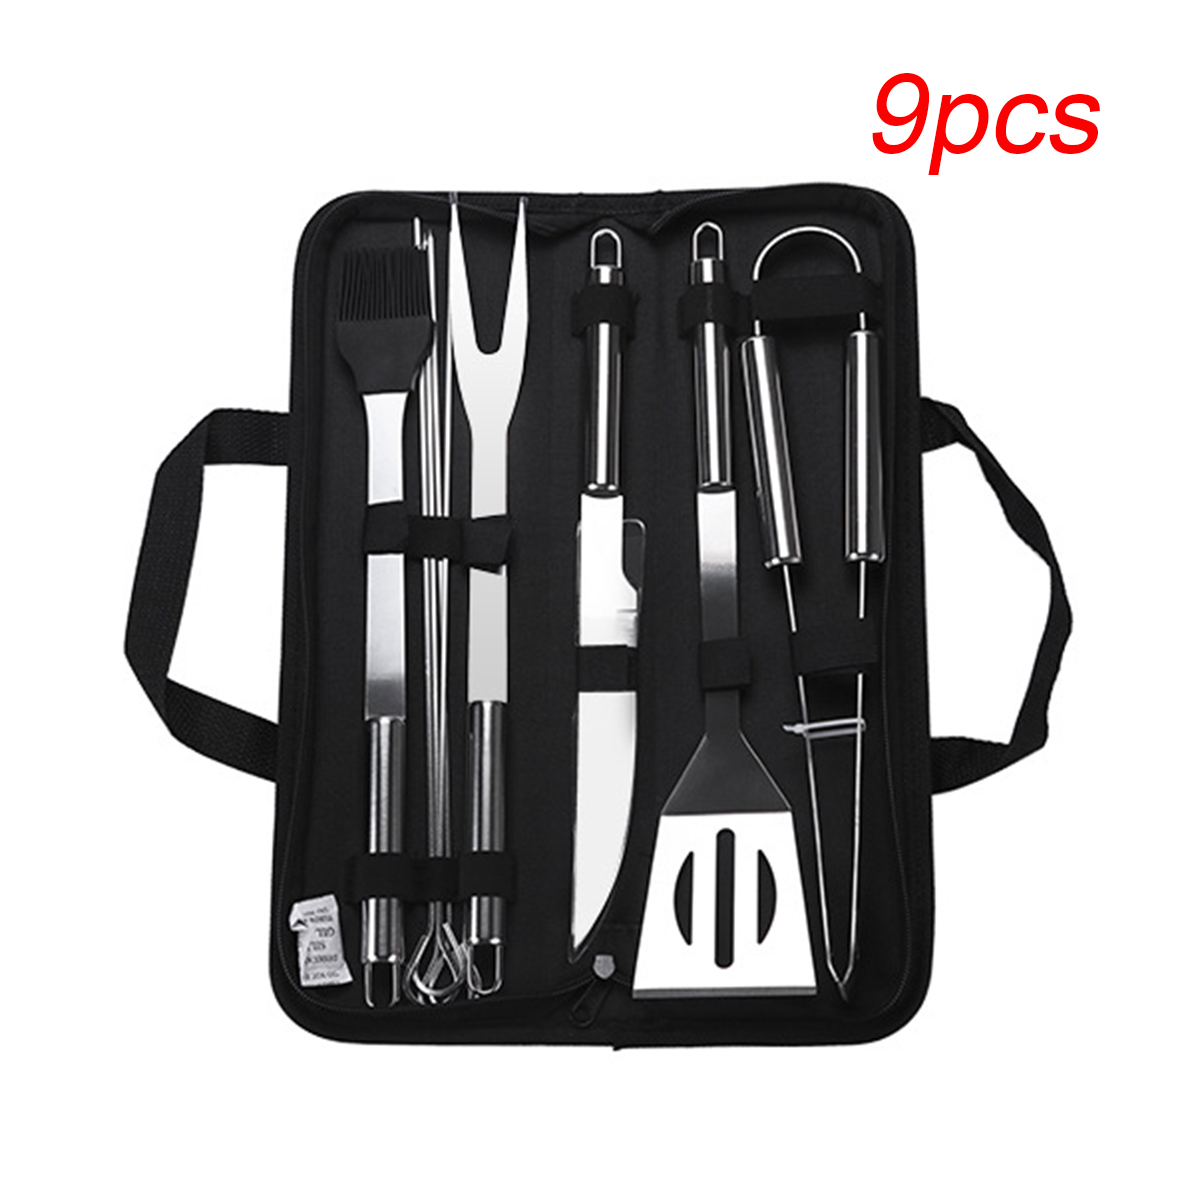 Stainless-Steel-BBQ-Tools-Set-Barbecue-Grilling-Utensil-Accessories-Camping-Outdoor-Cooking-1676473-5